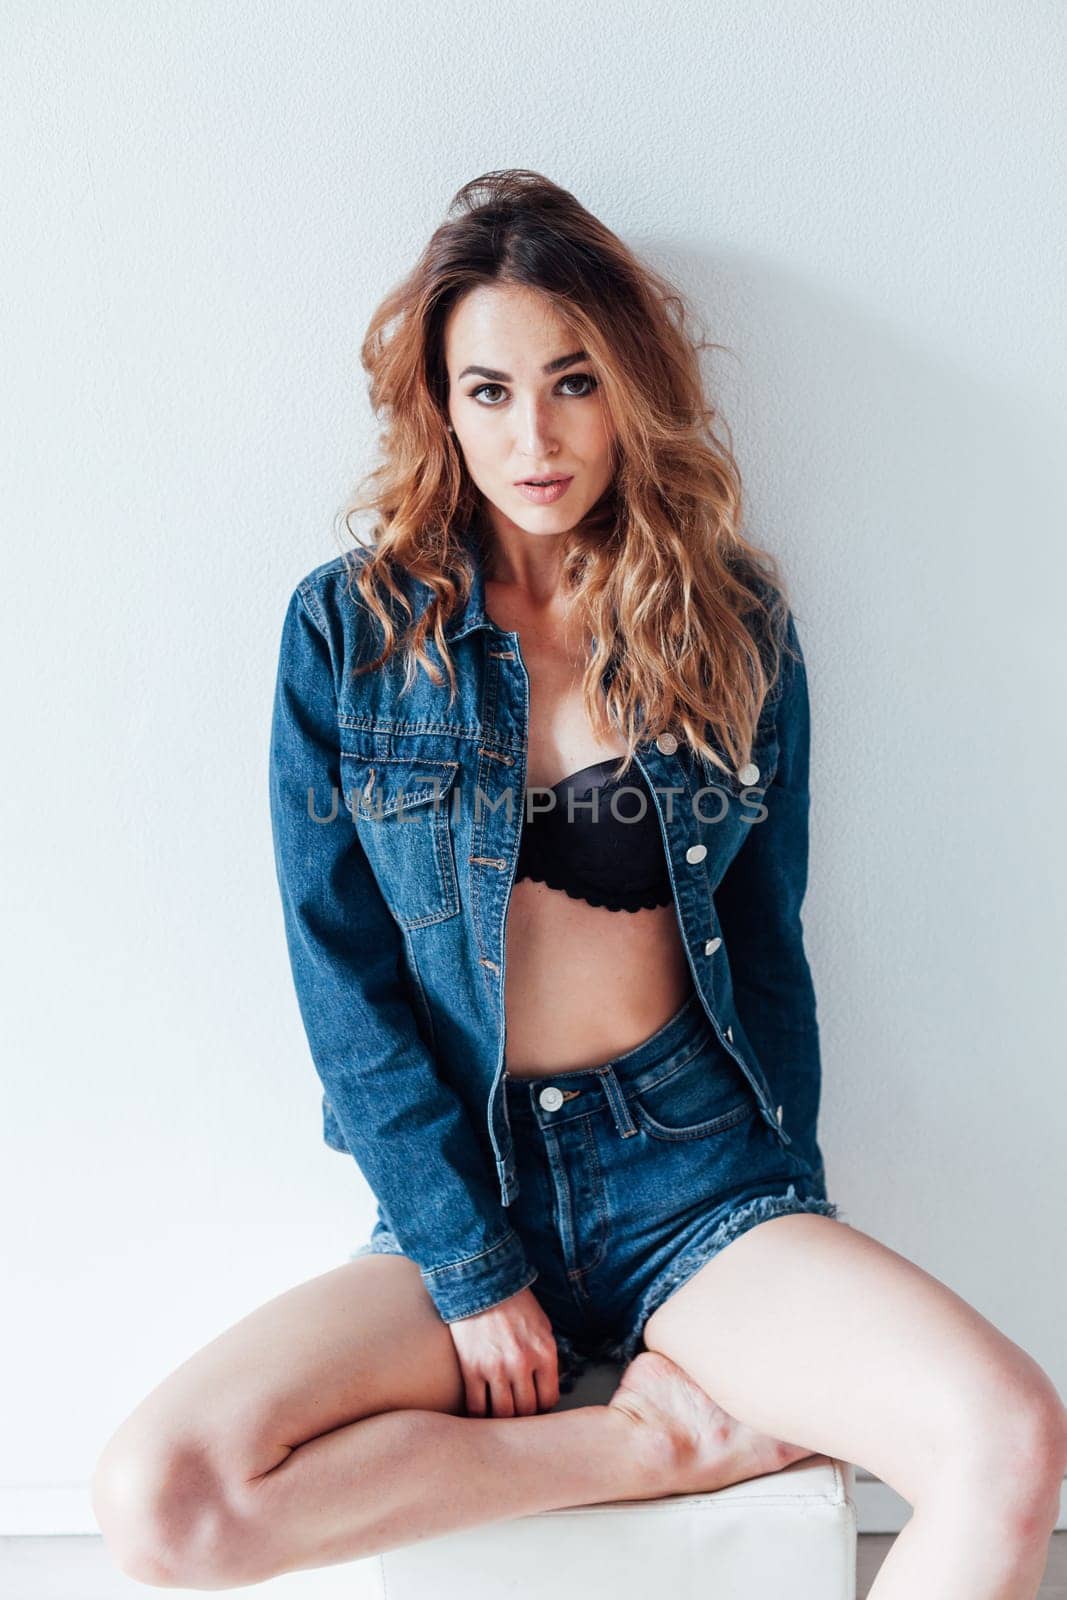 Portrait of a fashionable beautiful woman in denim shorts and lingerie by Simakov